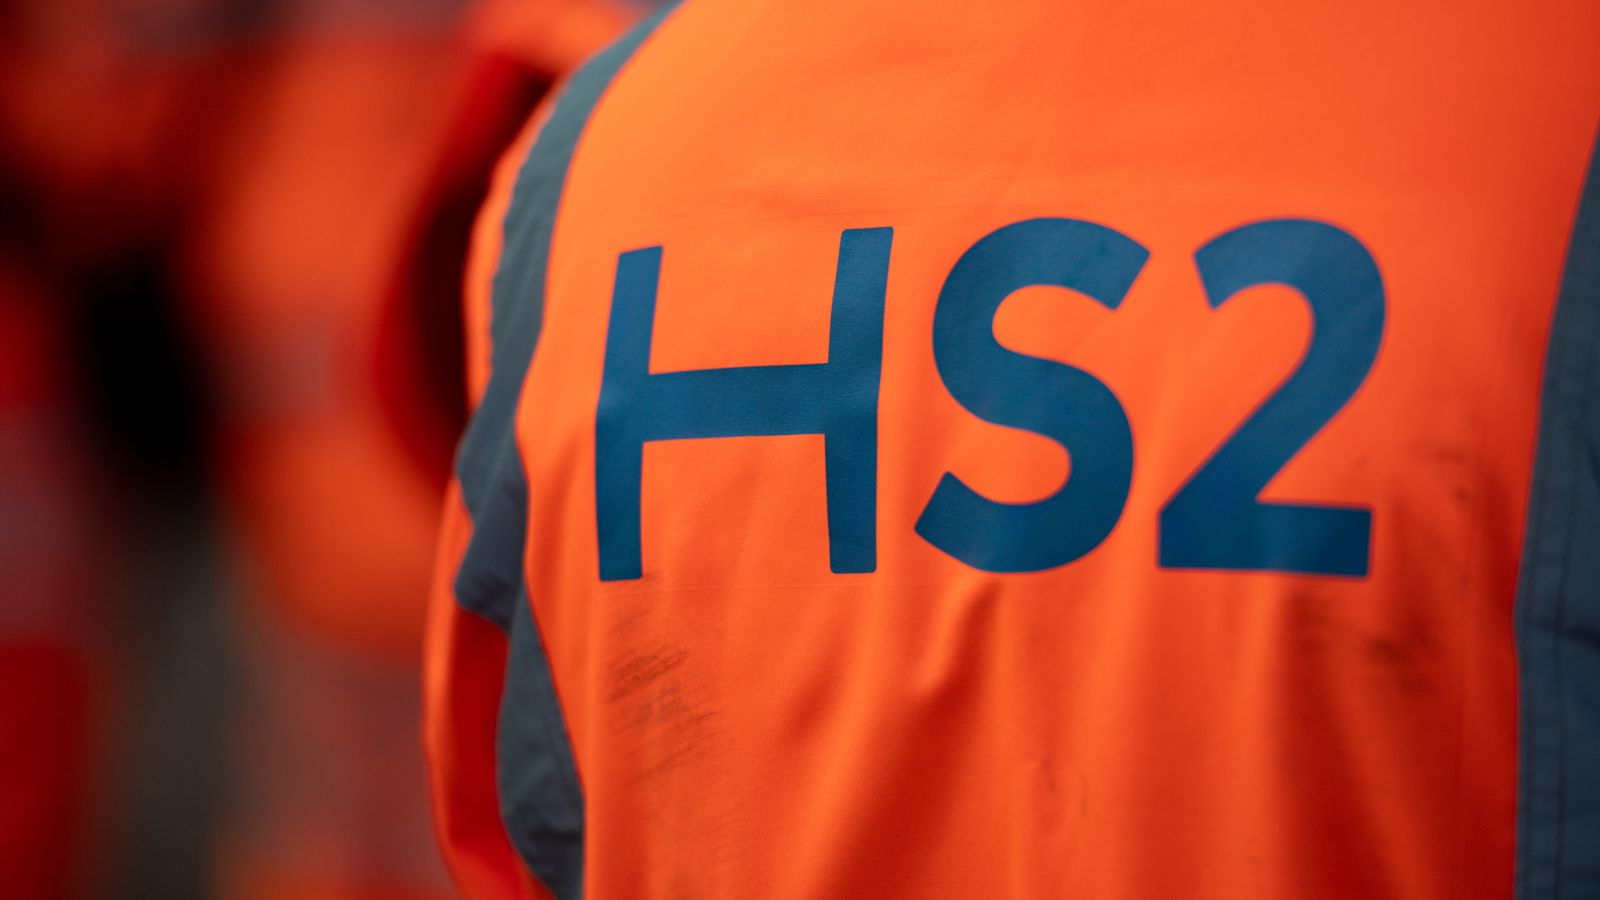 Leaked document shows HS2 delay will increase costs, says Labour